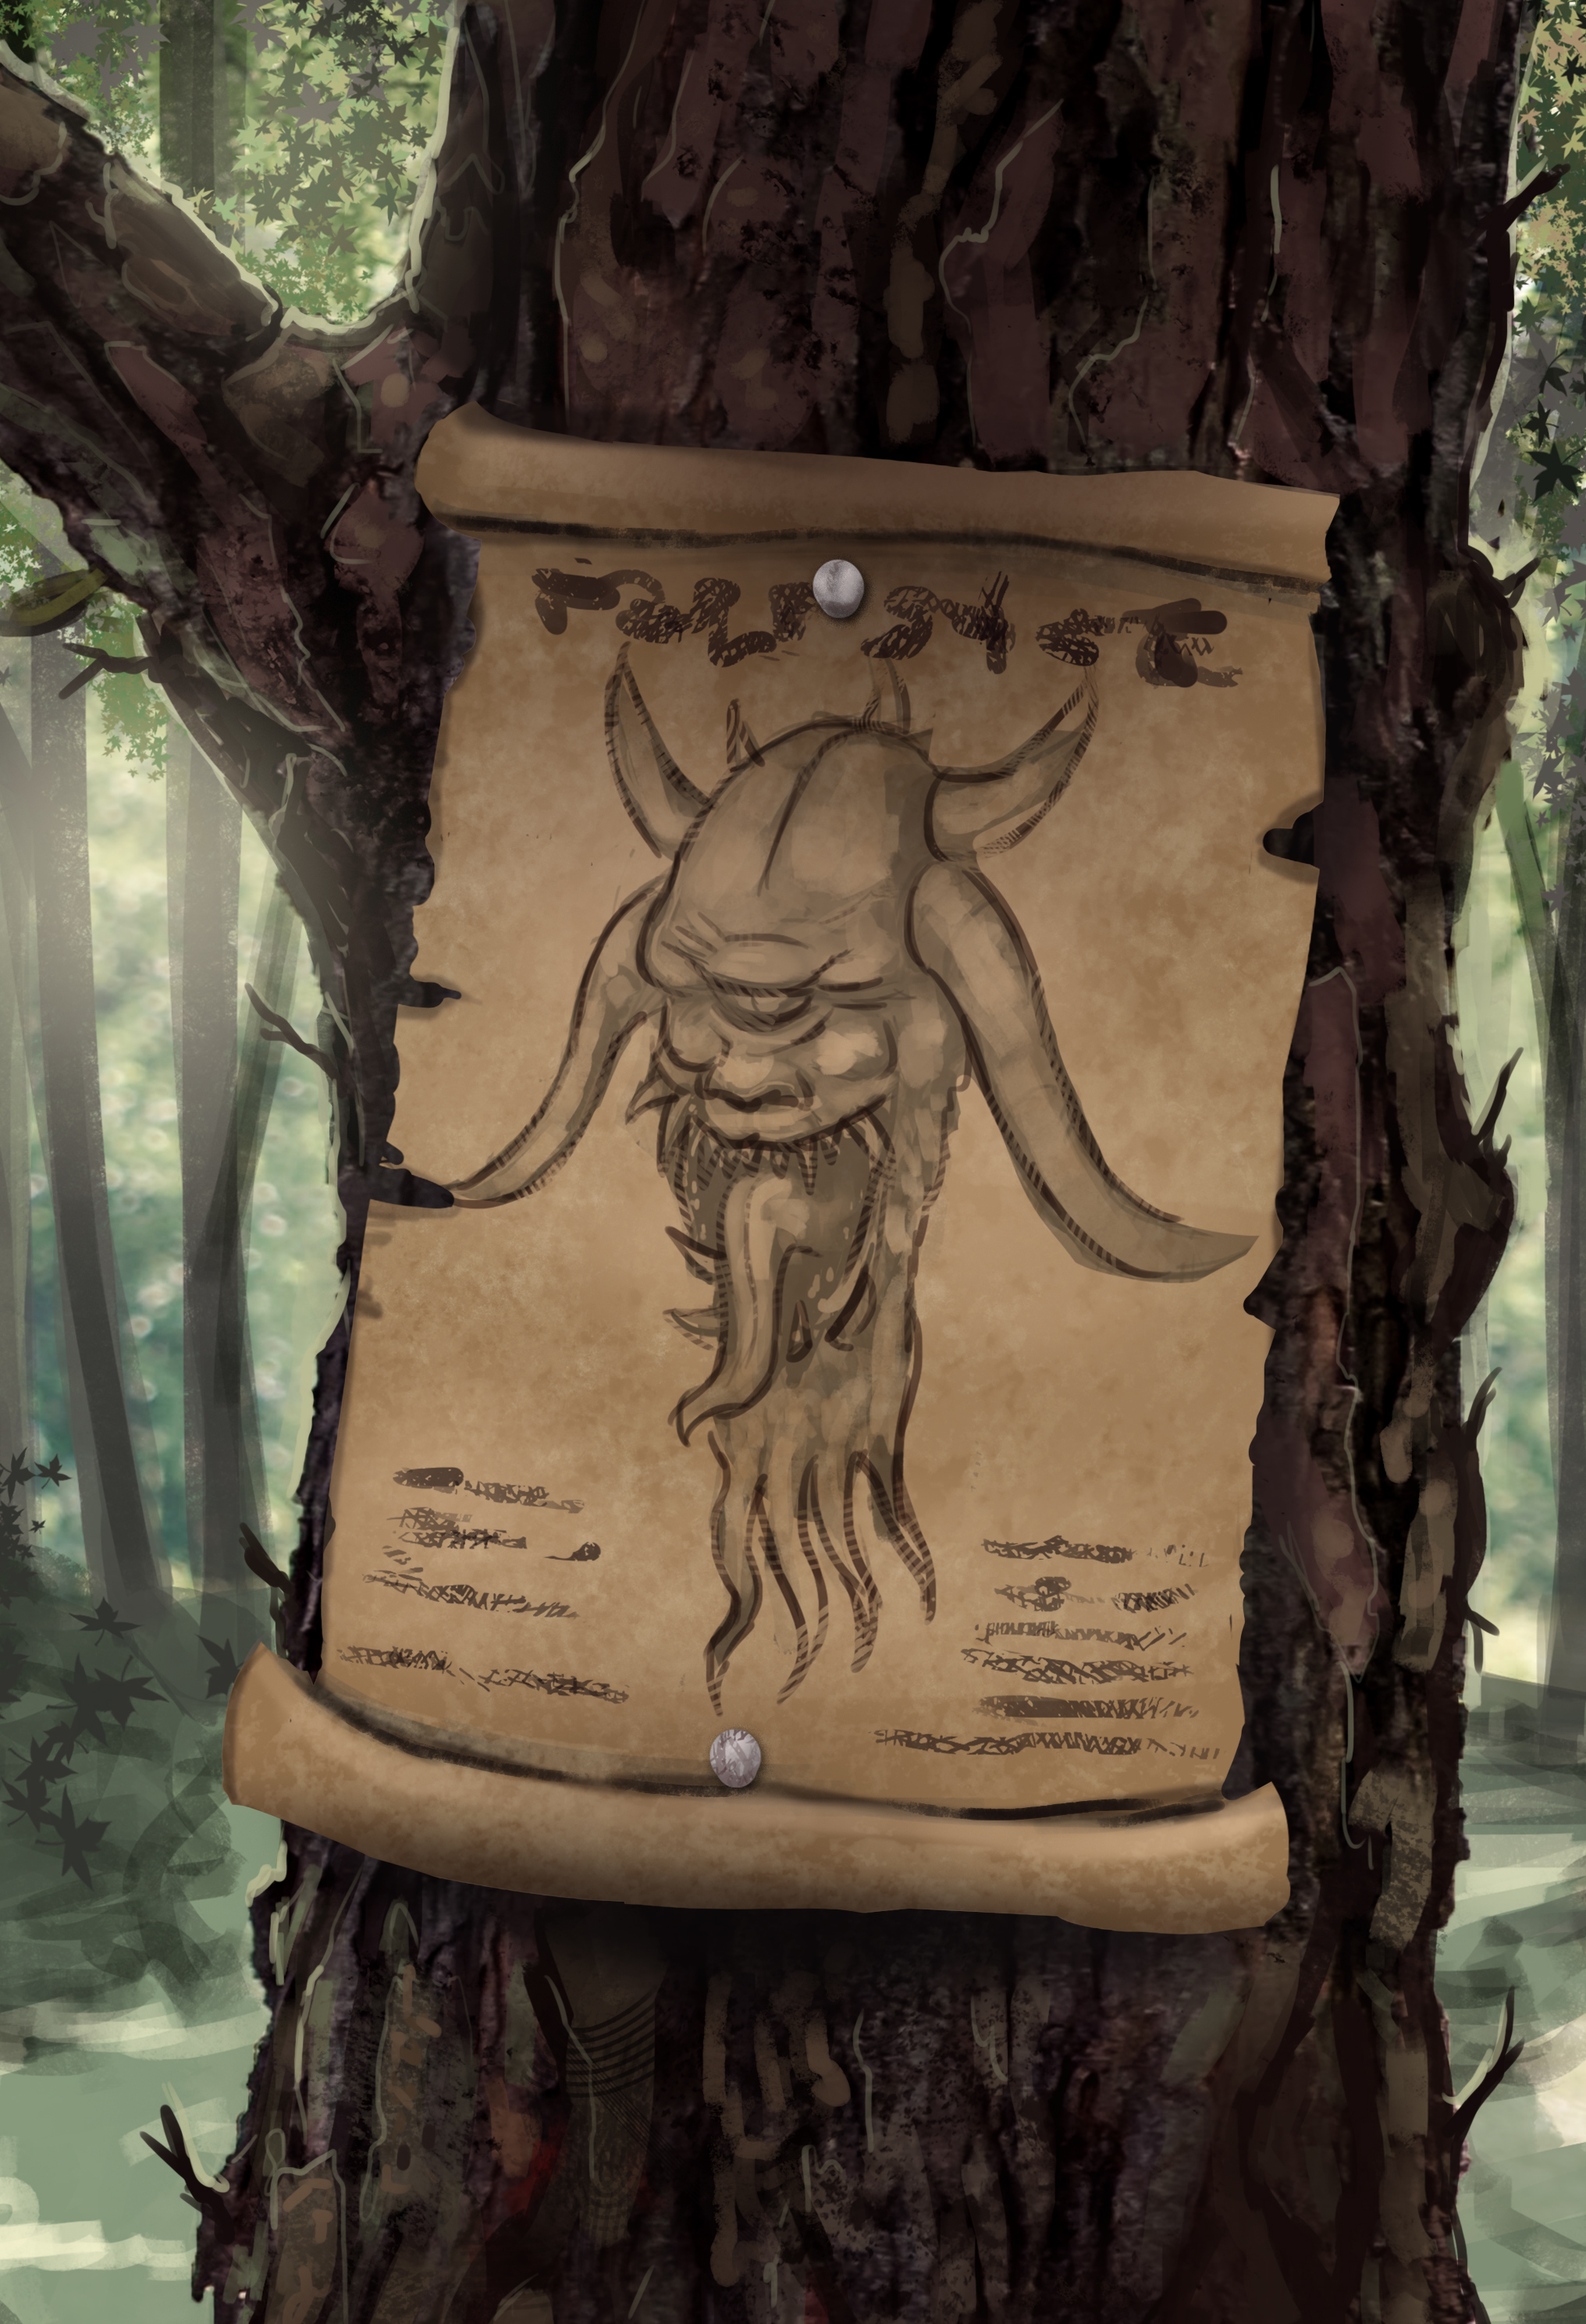 Monster wanted poster for a fantasy game